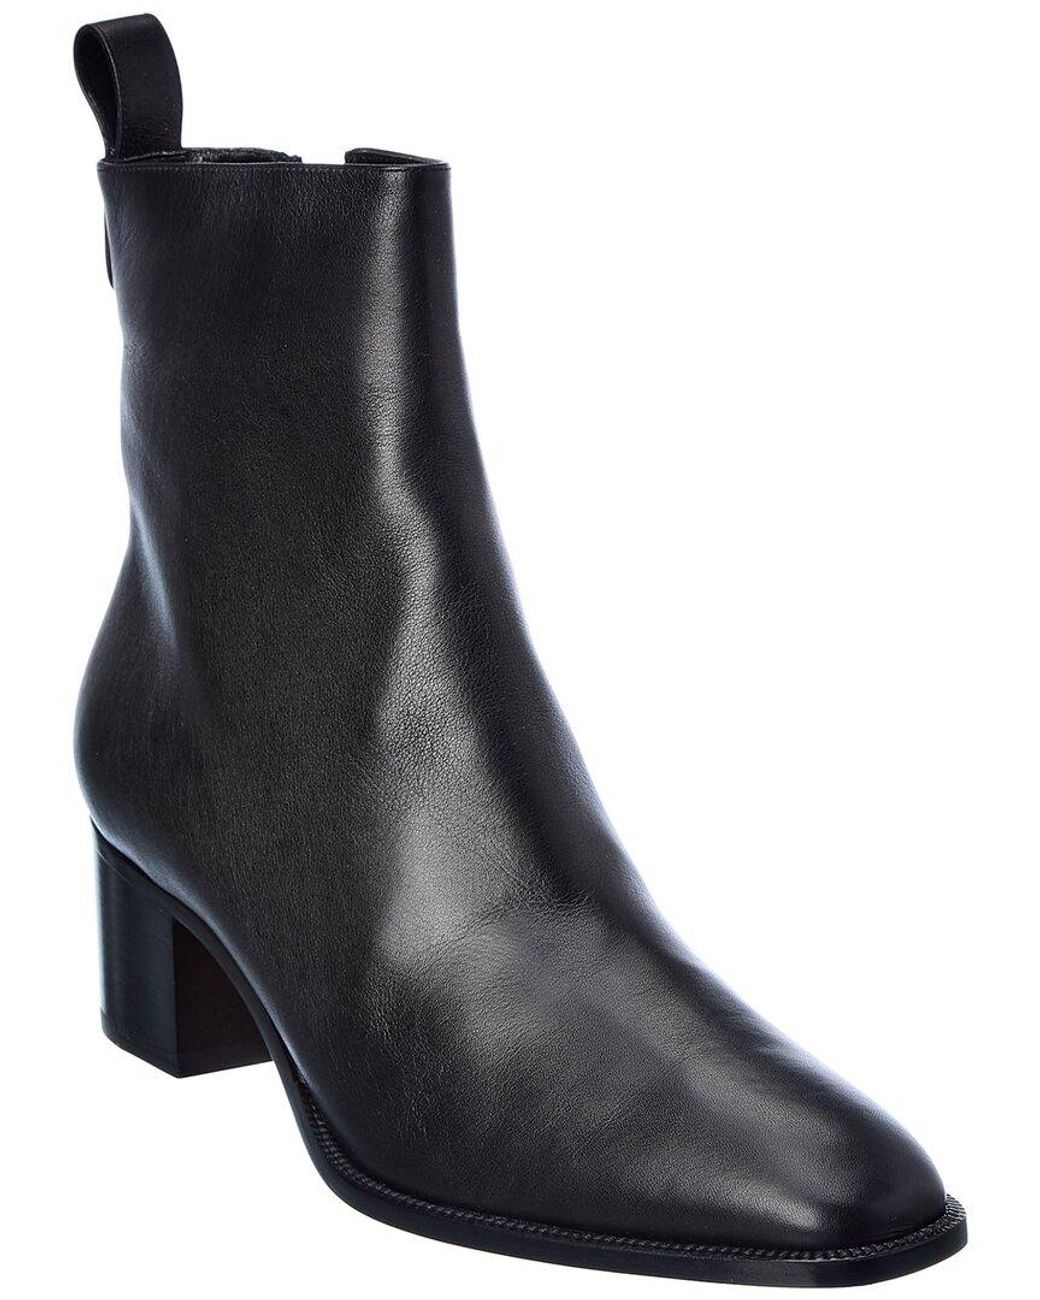 Christian Louboutin Antilop Leather Boot in Black | Lyst UK